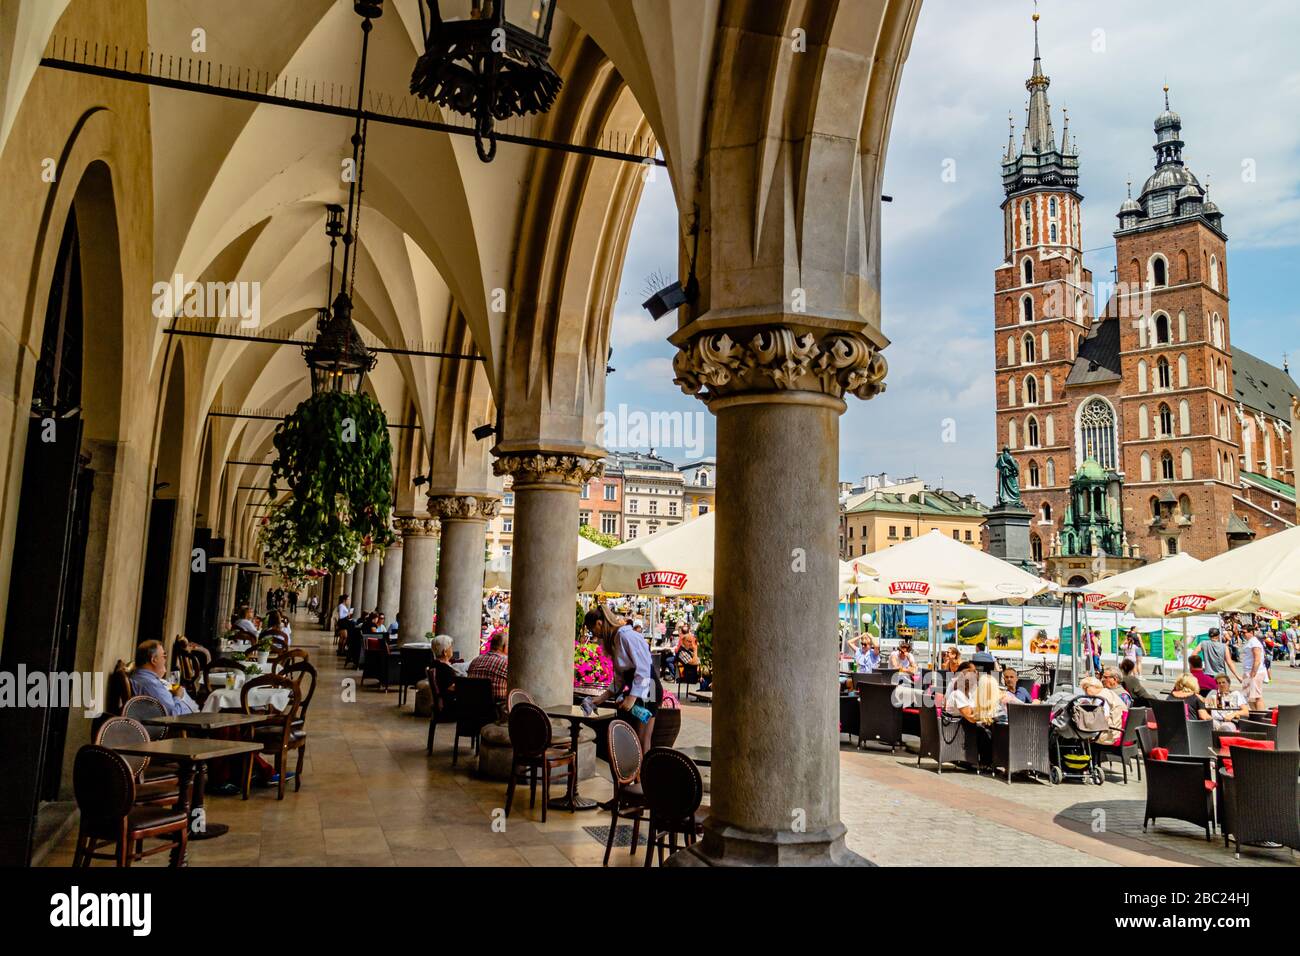 Busy cafe tables in the Rynek Główny or Main Square, with a view of St Mary's Basilica, in the city centre of Krakow, Poland. July 2017. Stock Photo